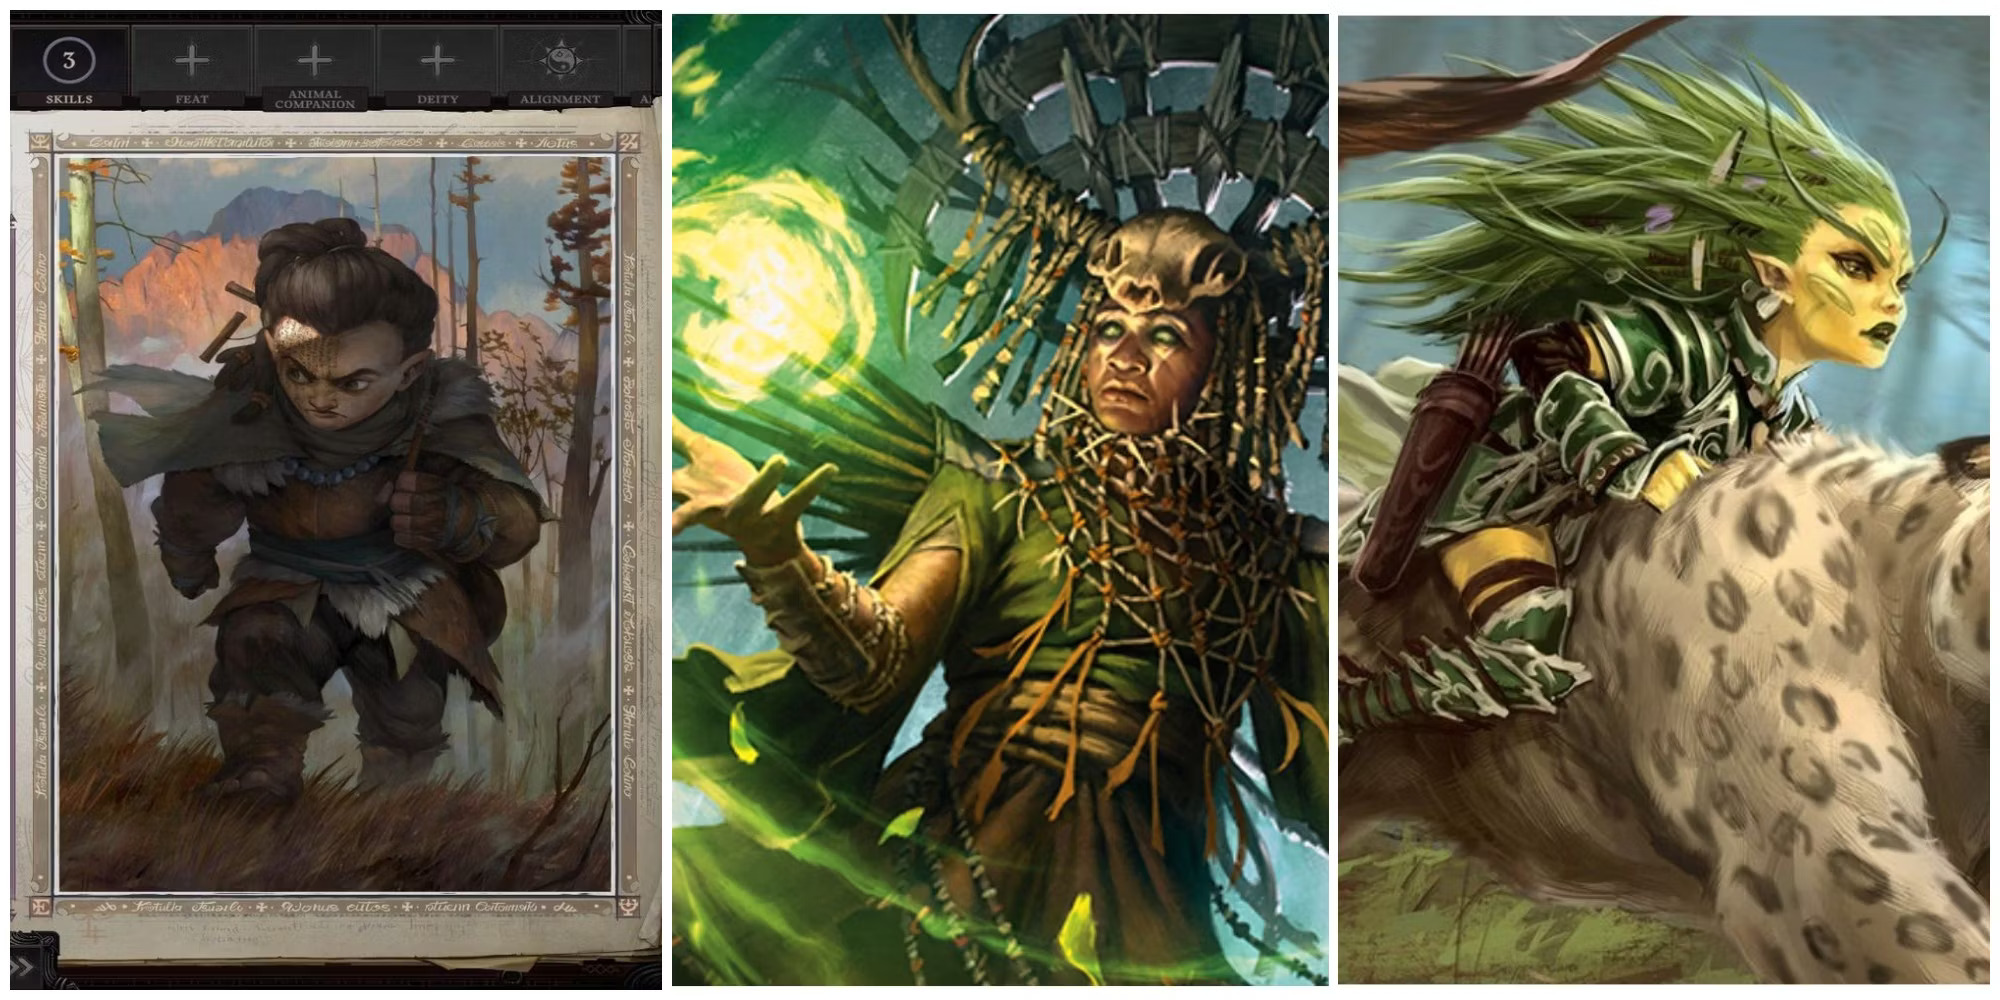 Druid From Pathfinder Game - The Most Powerful And Versatile Class Of The Game